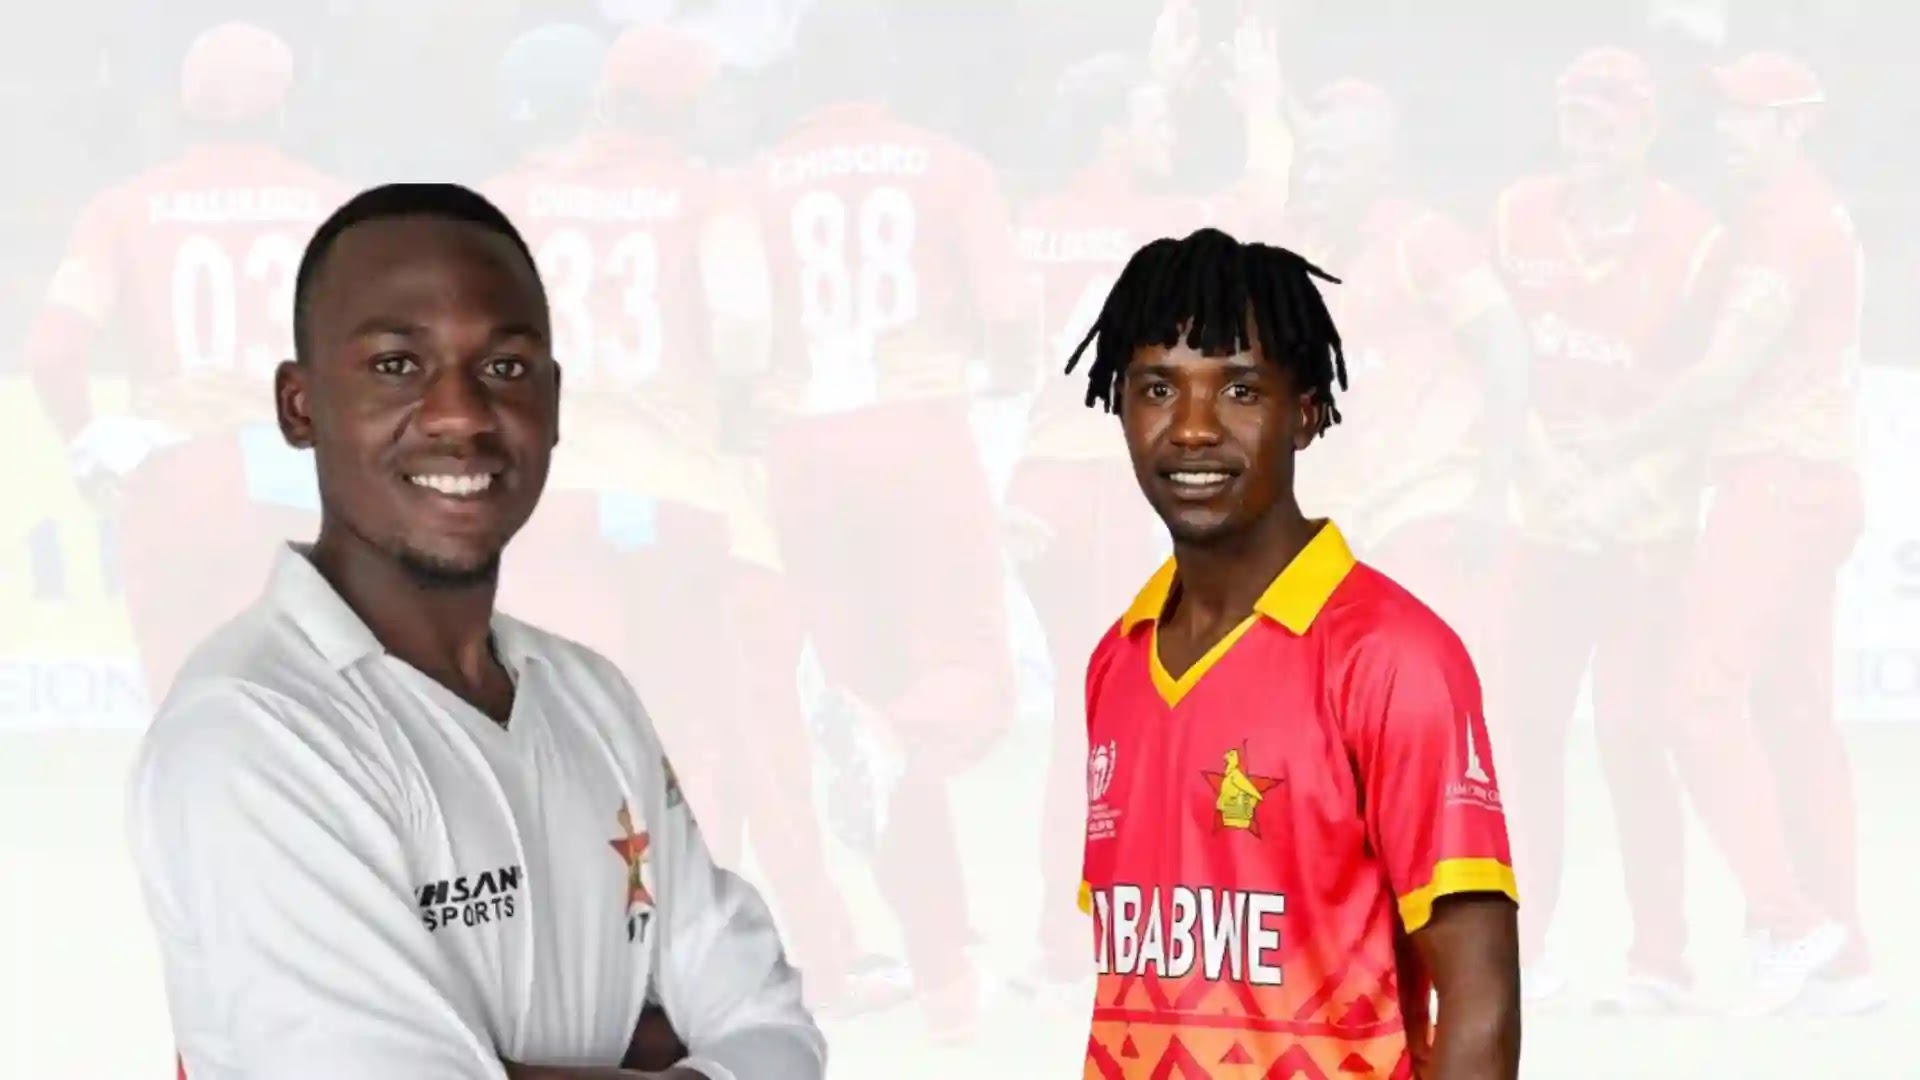 Cricketers Brandon Mavura and Wessly Madhevere reinstated by ZC after drug use suspension